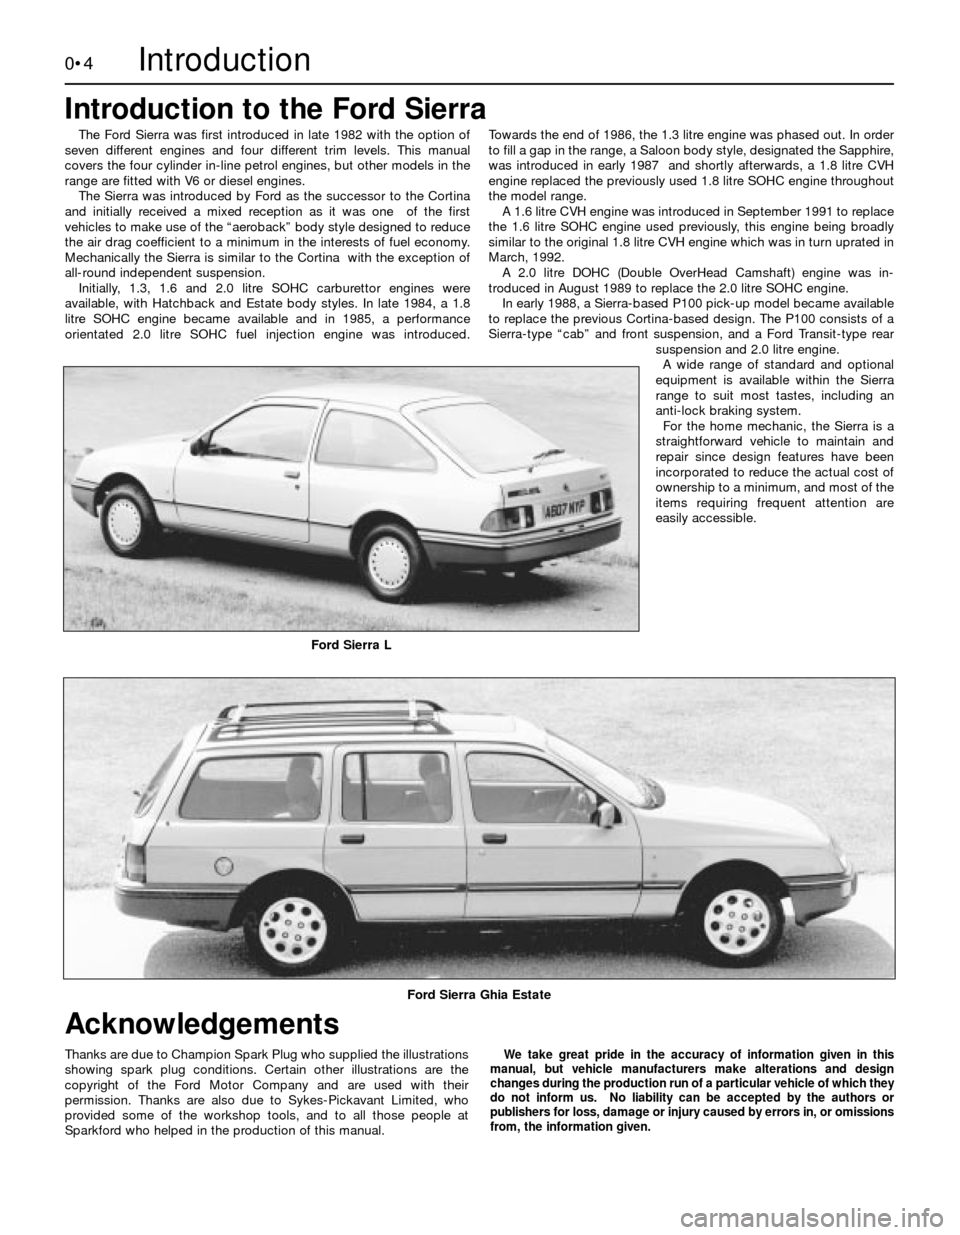 FORD SIERRA 1991 2.G Introduction Workshop Manual 0•4
The Ford Sierra was first introduced in late 1982 with the option of
seven different engines and four different trim levels. This manual
covers the four cylinder in-line petrol engines, but othe